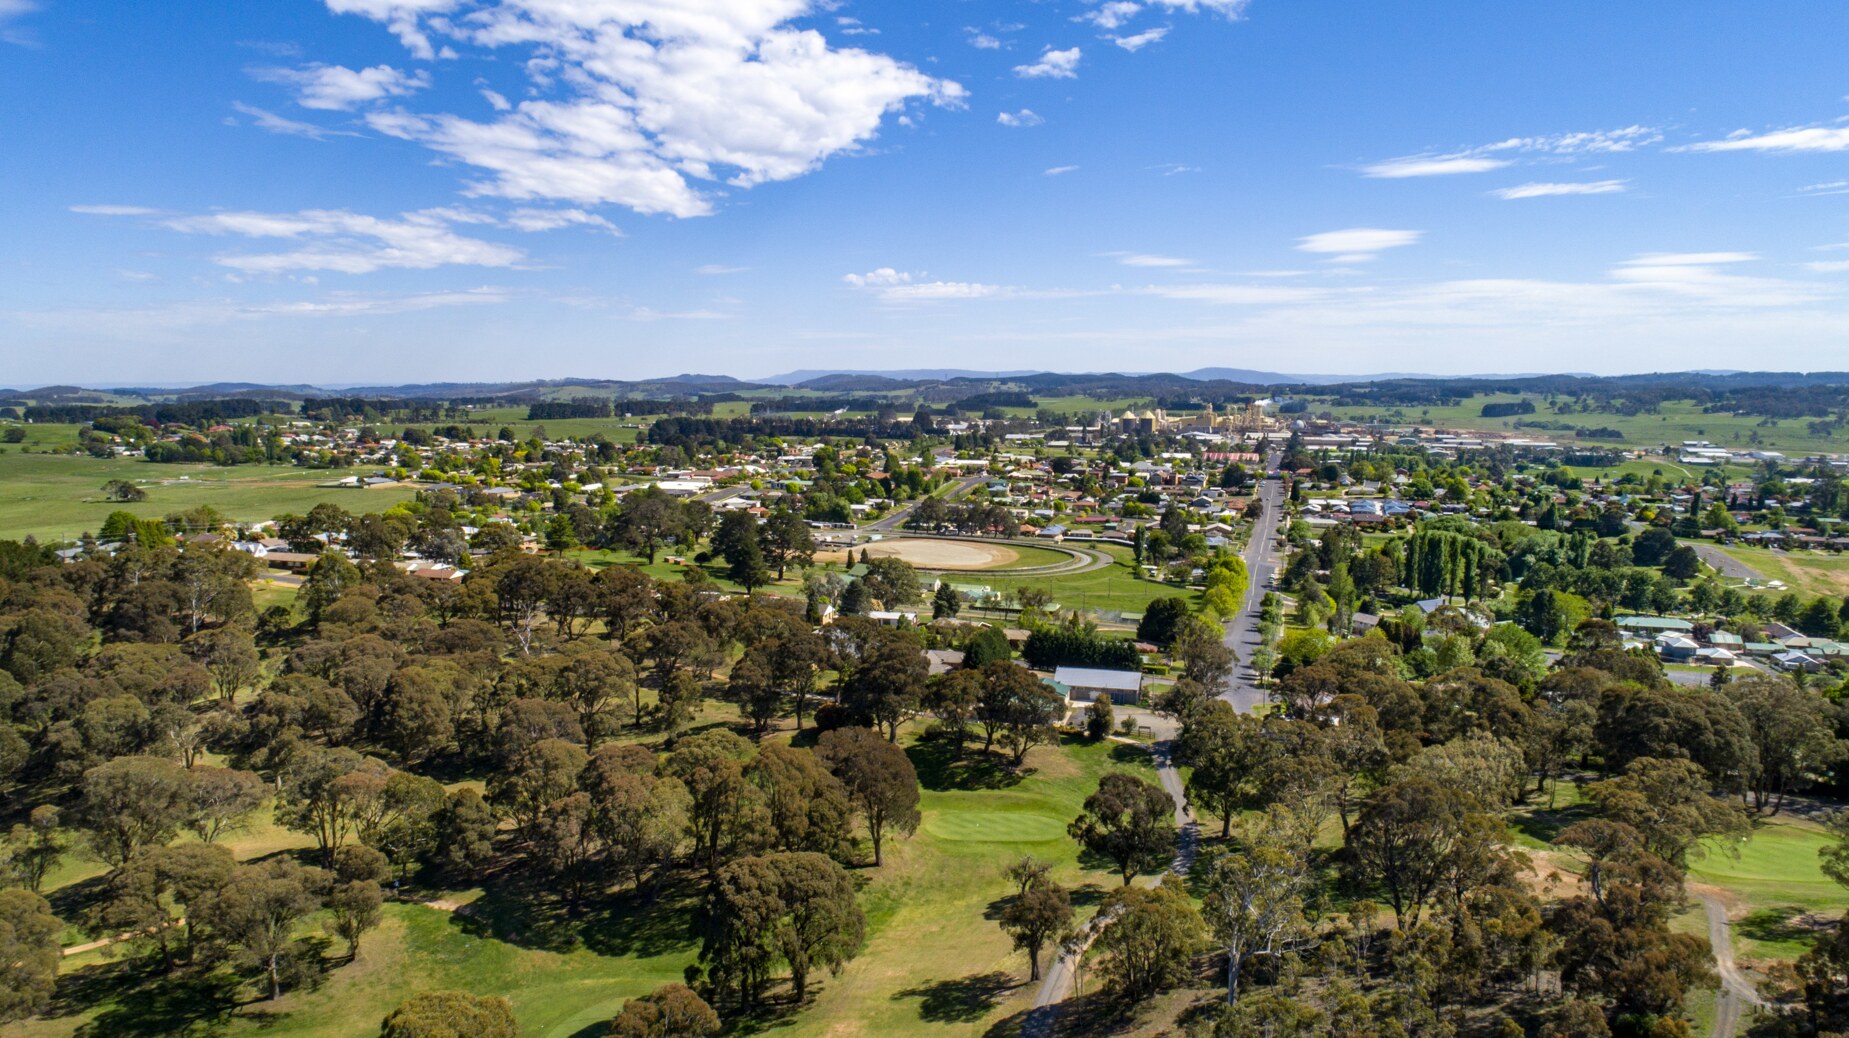 An aerial shot of Oberon town in NSW Central West taken on a sunny day with blue skies